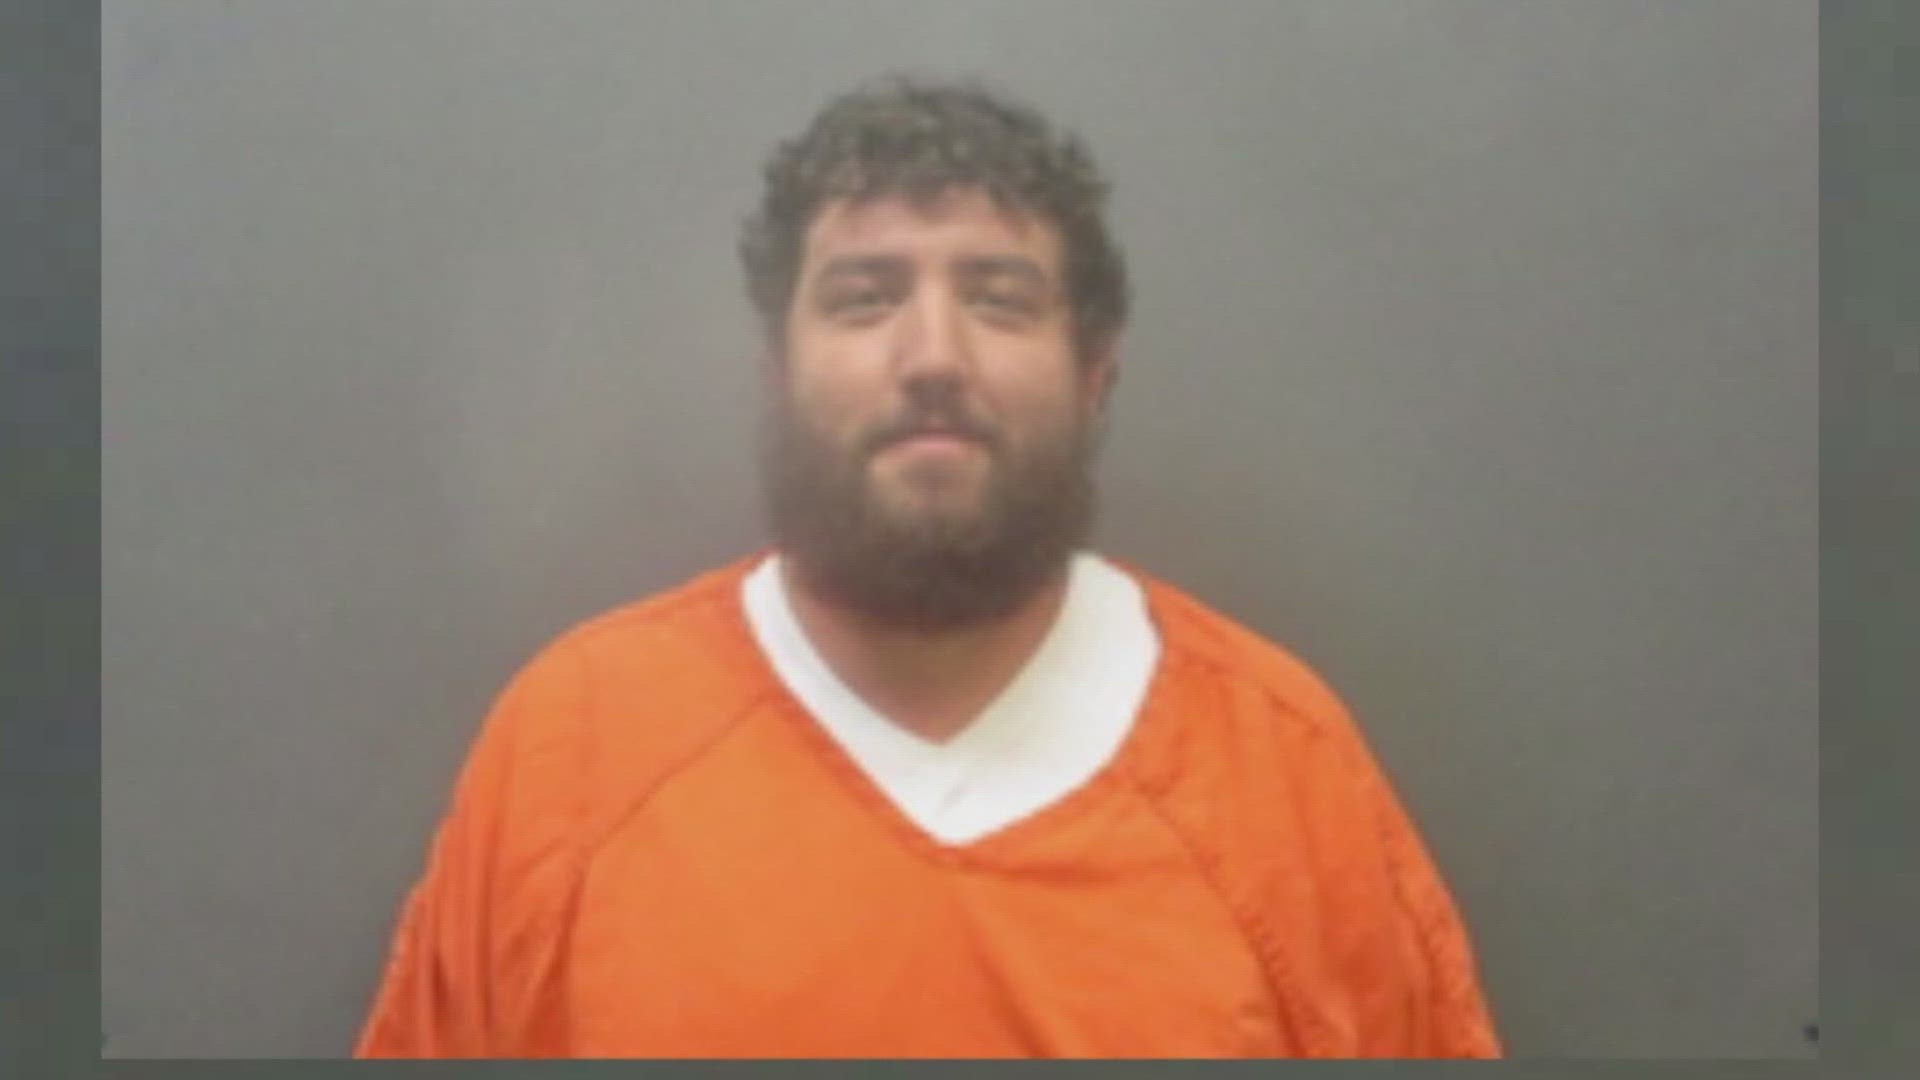 Brendan Myers was arrested on multiple counts of theft, including allegedly swindling a Milam County woman out of tens of thousands of dollars.